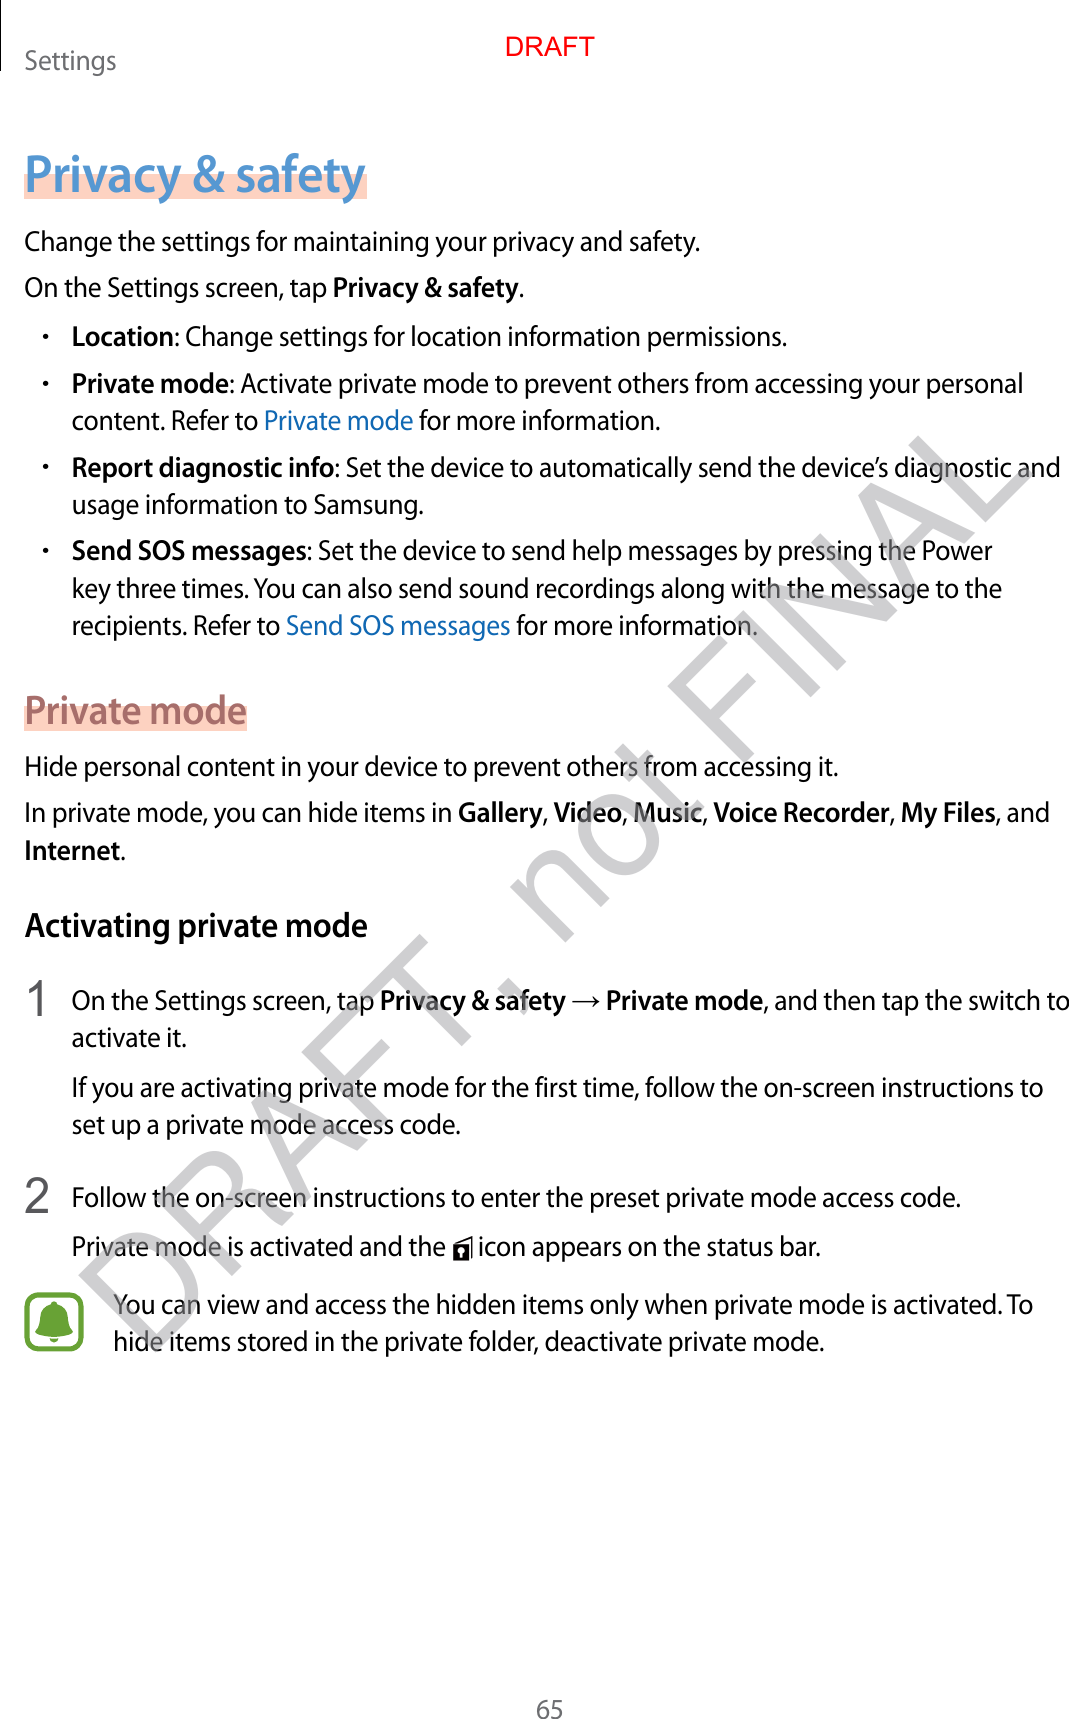 Settings65Privacy &amp; safetyChange the settings for maintaining your privacy and safety.On the Settings screen, tap Privacy &amp; safety.•Location: Change settings for location information permissions.•Private mode: Activate private mode to prevent others from accessing your personal content. Refer to Private mode for more information.•Report diagnostic info: Set the device to automatically send the device’s diagnostic and usage information to Samsung.•Send SOS messages: Set the device to send help messages by pressing the Power key three times. You can also send sound recordings along with the message to the recipients. Refer to Send SOS messages for more information.Private modeHide personal content in your device to prevent others from accessing it.In private mode, you can hide items in Gallery, Video, Music, Voice Recorder, My Files, and Internet.Activating private mode1  On the Settings screen, tap Privacy &amp; safety → Private mode, and then tap the switch to activate it.If you are activating private mode for the first time, follow the on-screen instructions to set up a private mode access code.2  Follow the on-screen instructions to enter the preset private mode access code.Private mode is activated and the   icon appears on the status bar.You can view and access the hidden items only when private mode is activated. To hide items stored in the private folder, deactivate private mode.DRAFTDRAFT, not FINAL